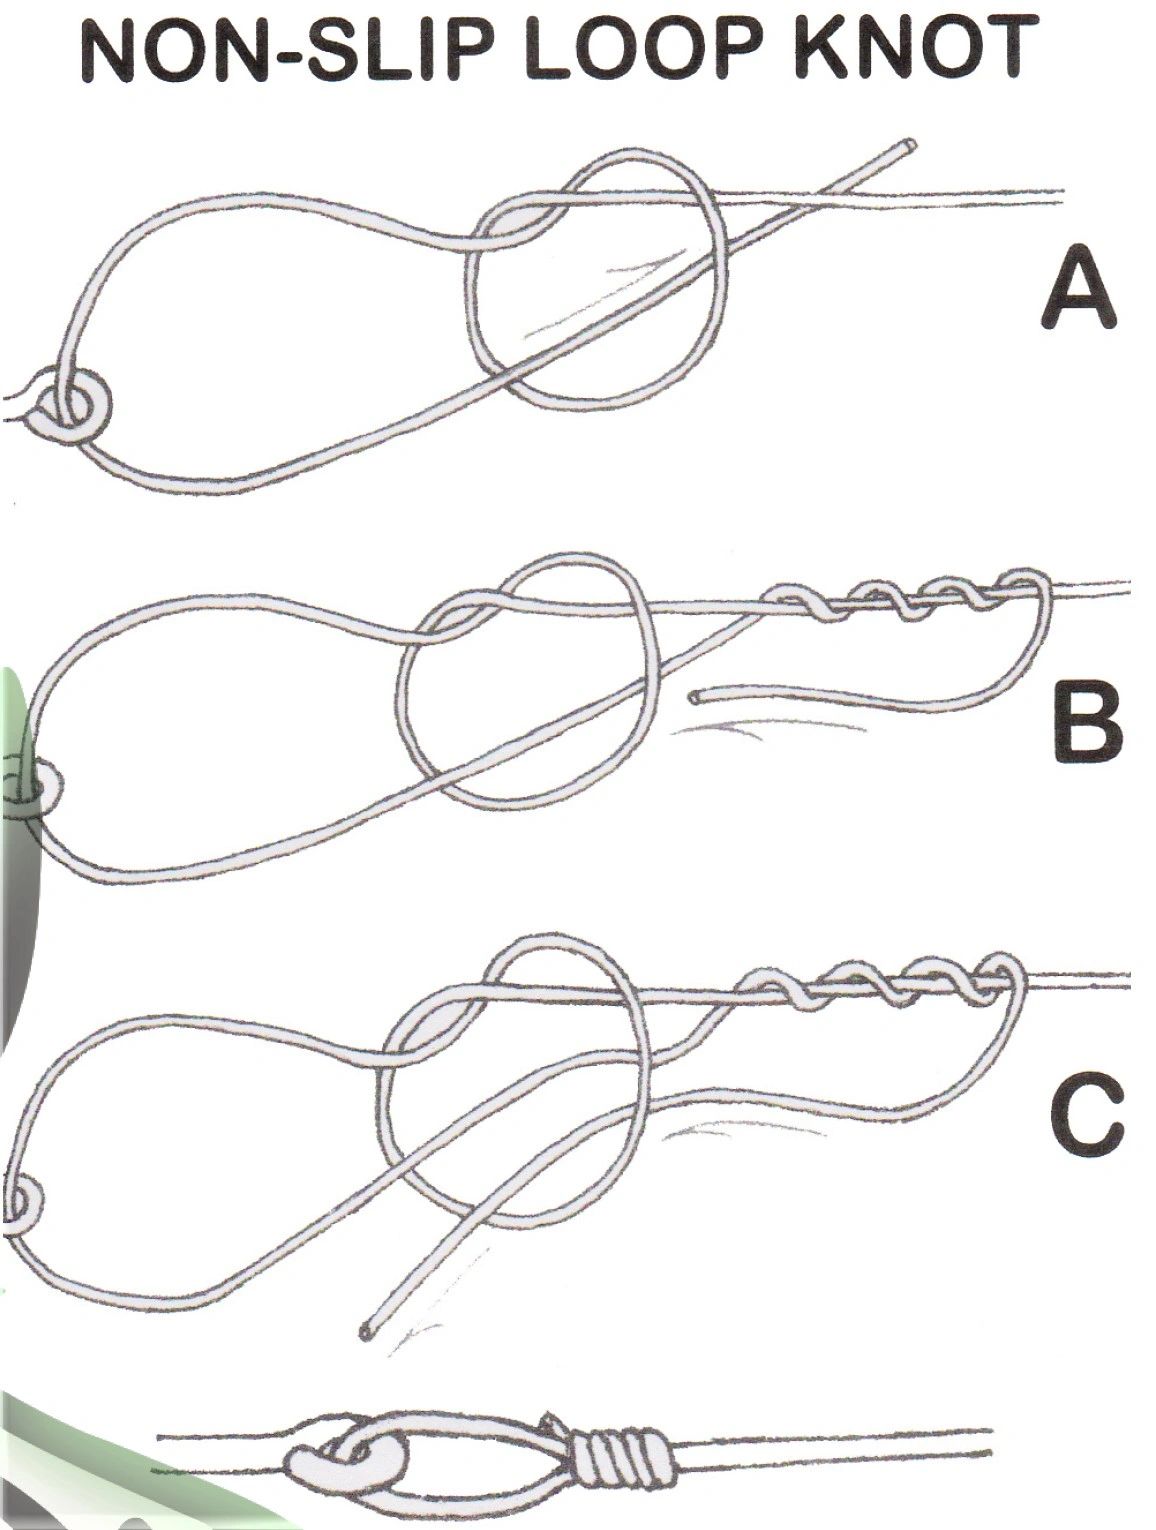 How to tie the Kryston Non Slip Loop Knot animated and illustrated